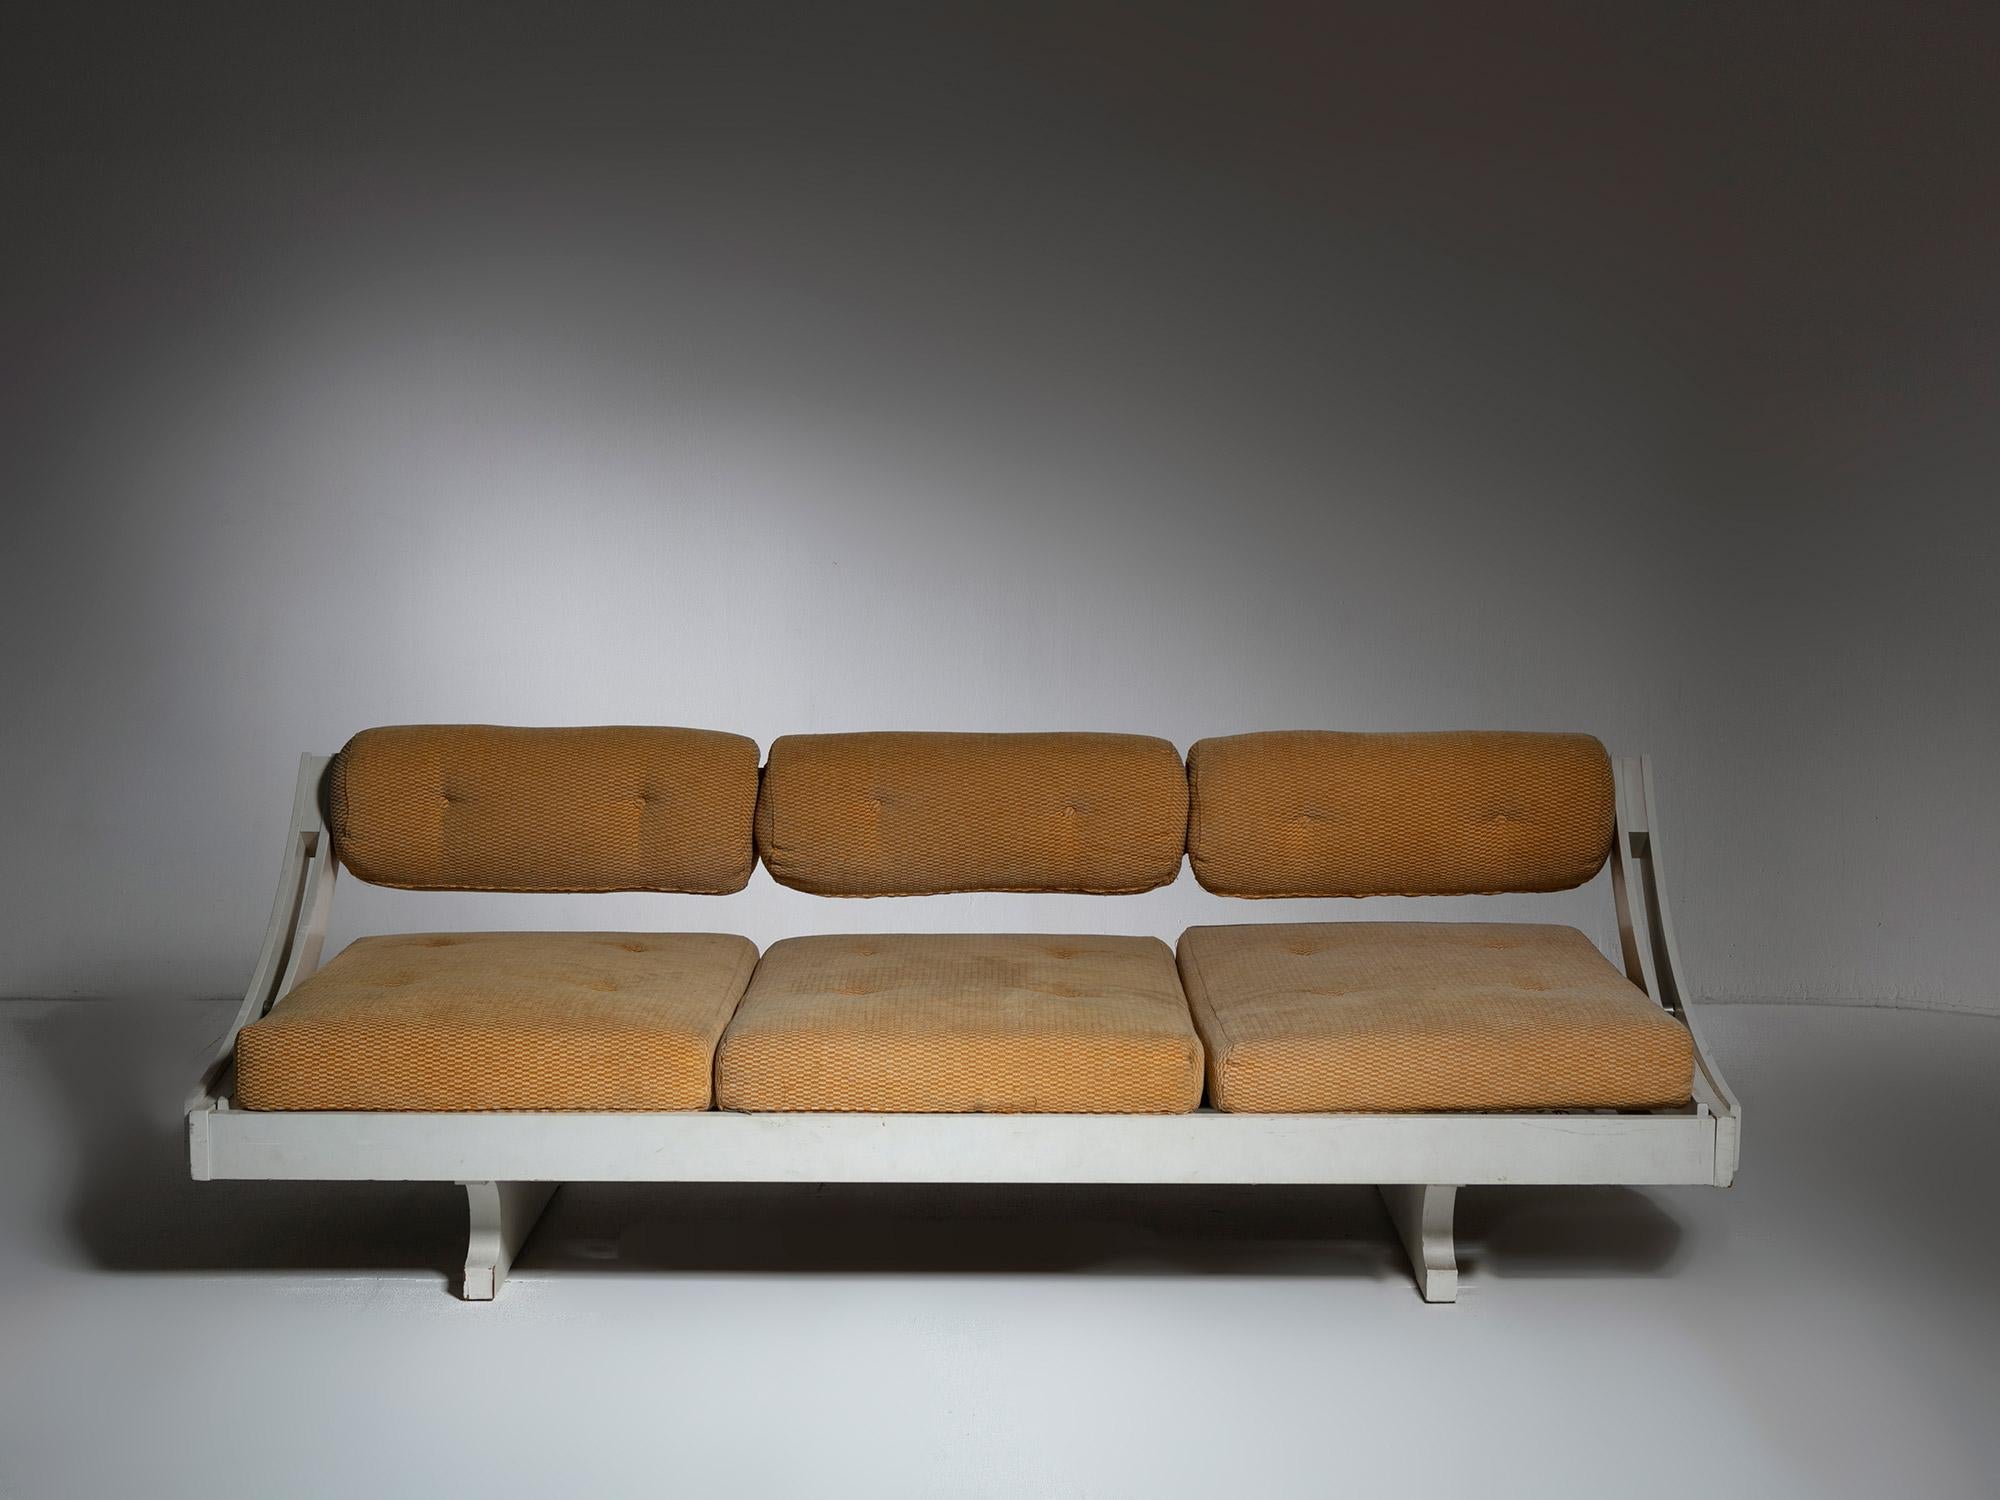 Italian Adjustable White Wood Daybed By Gianni Songia for Sormani, Italy, 1960s For Sale